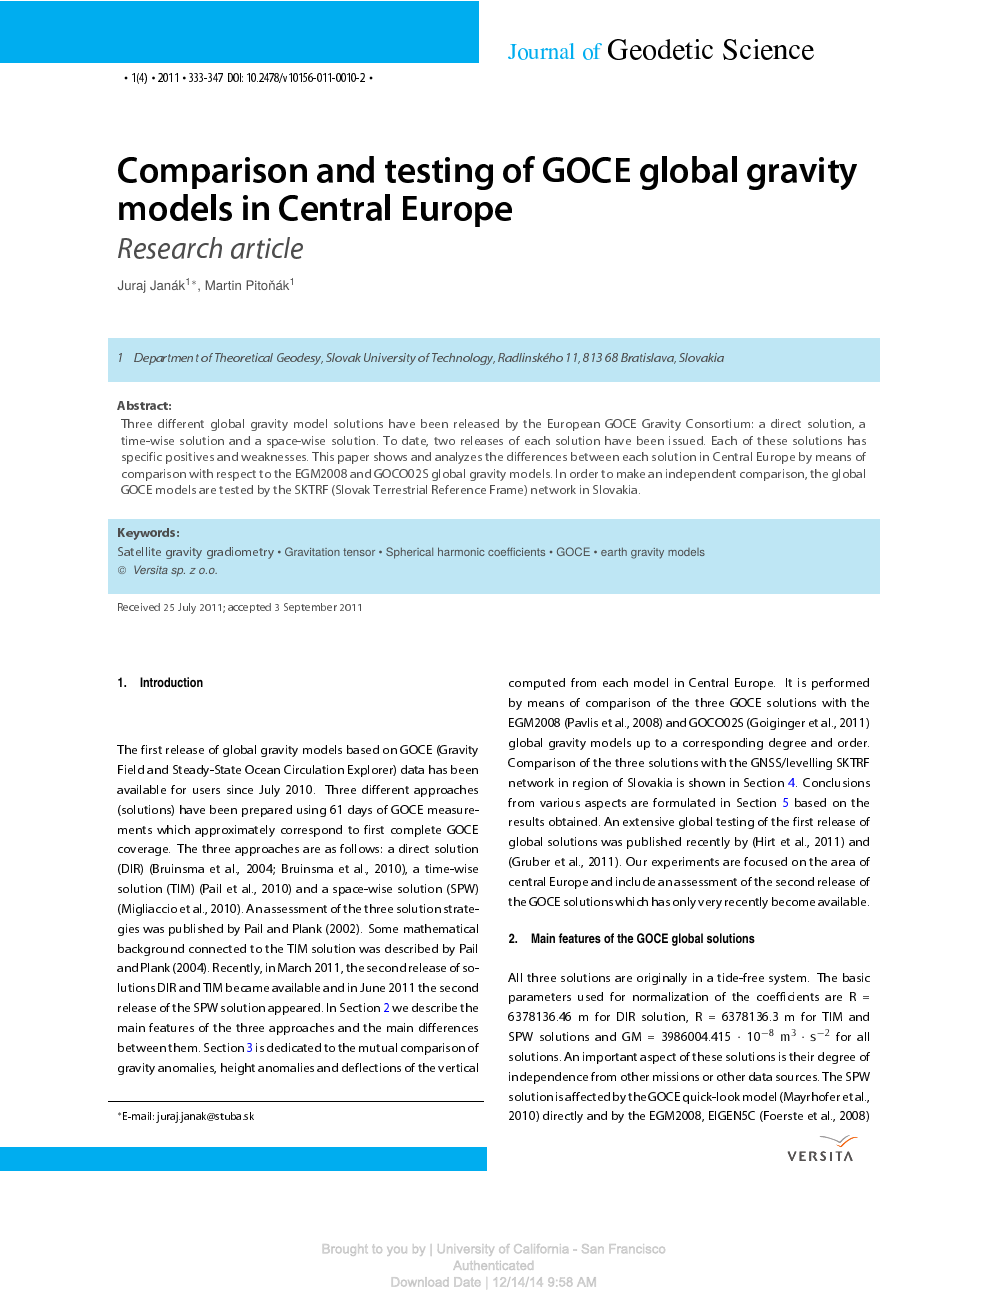 Comparison And Testing Of Goce Global Gravity Models In Central Europe Topic Of Research Paper In Earth And Related Environmental Sciences Download Scholarly Article Pdf And Read For Free On Cyberleninka